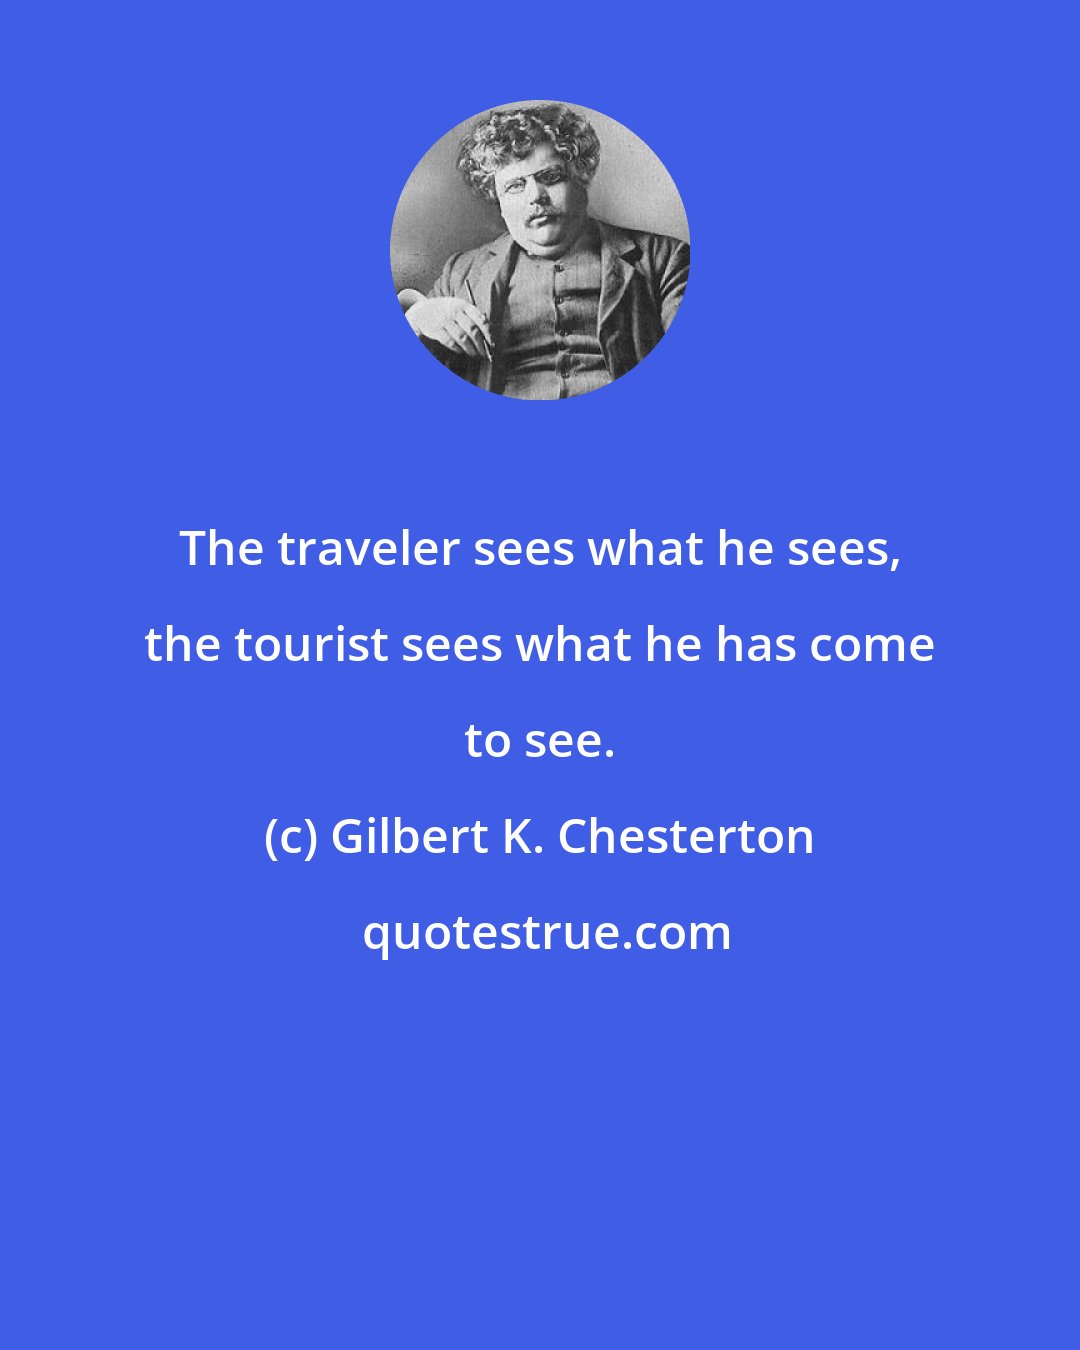 Gilbert K. Chesterton: The traveler sees what he sees, the tourist sees what he has come to see.